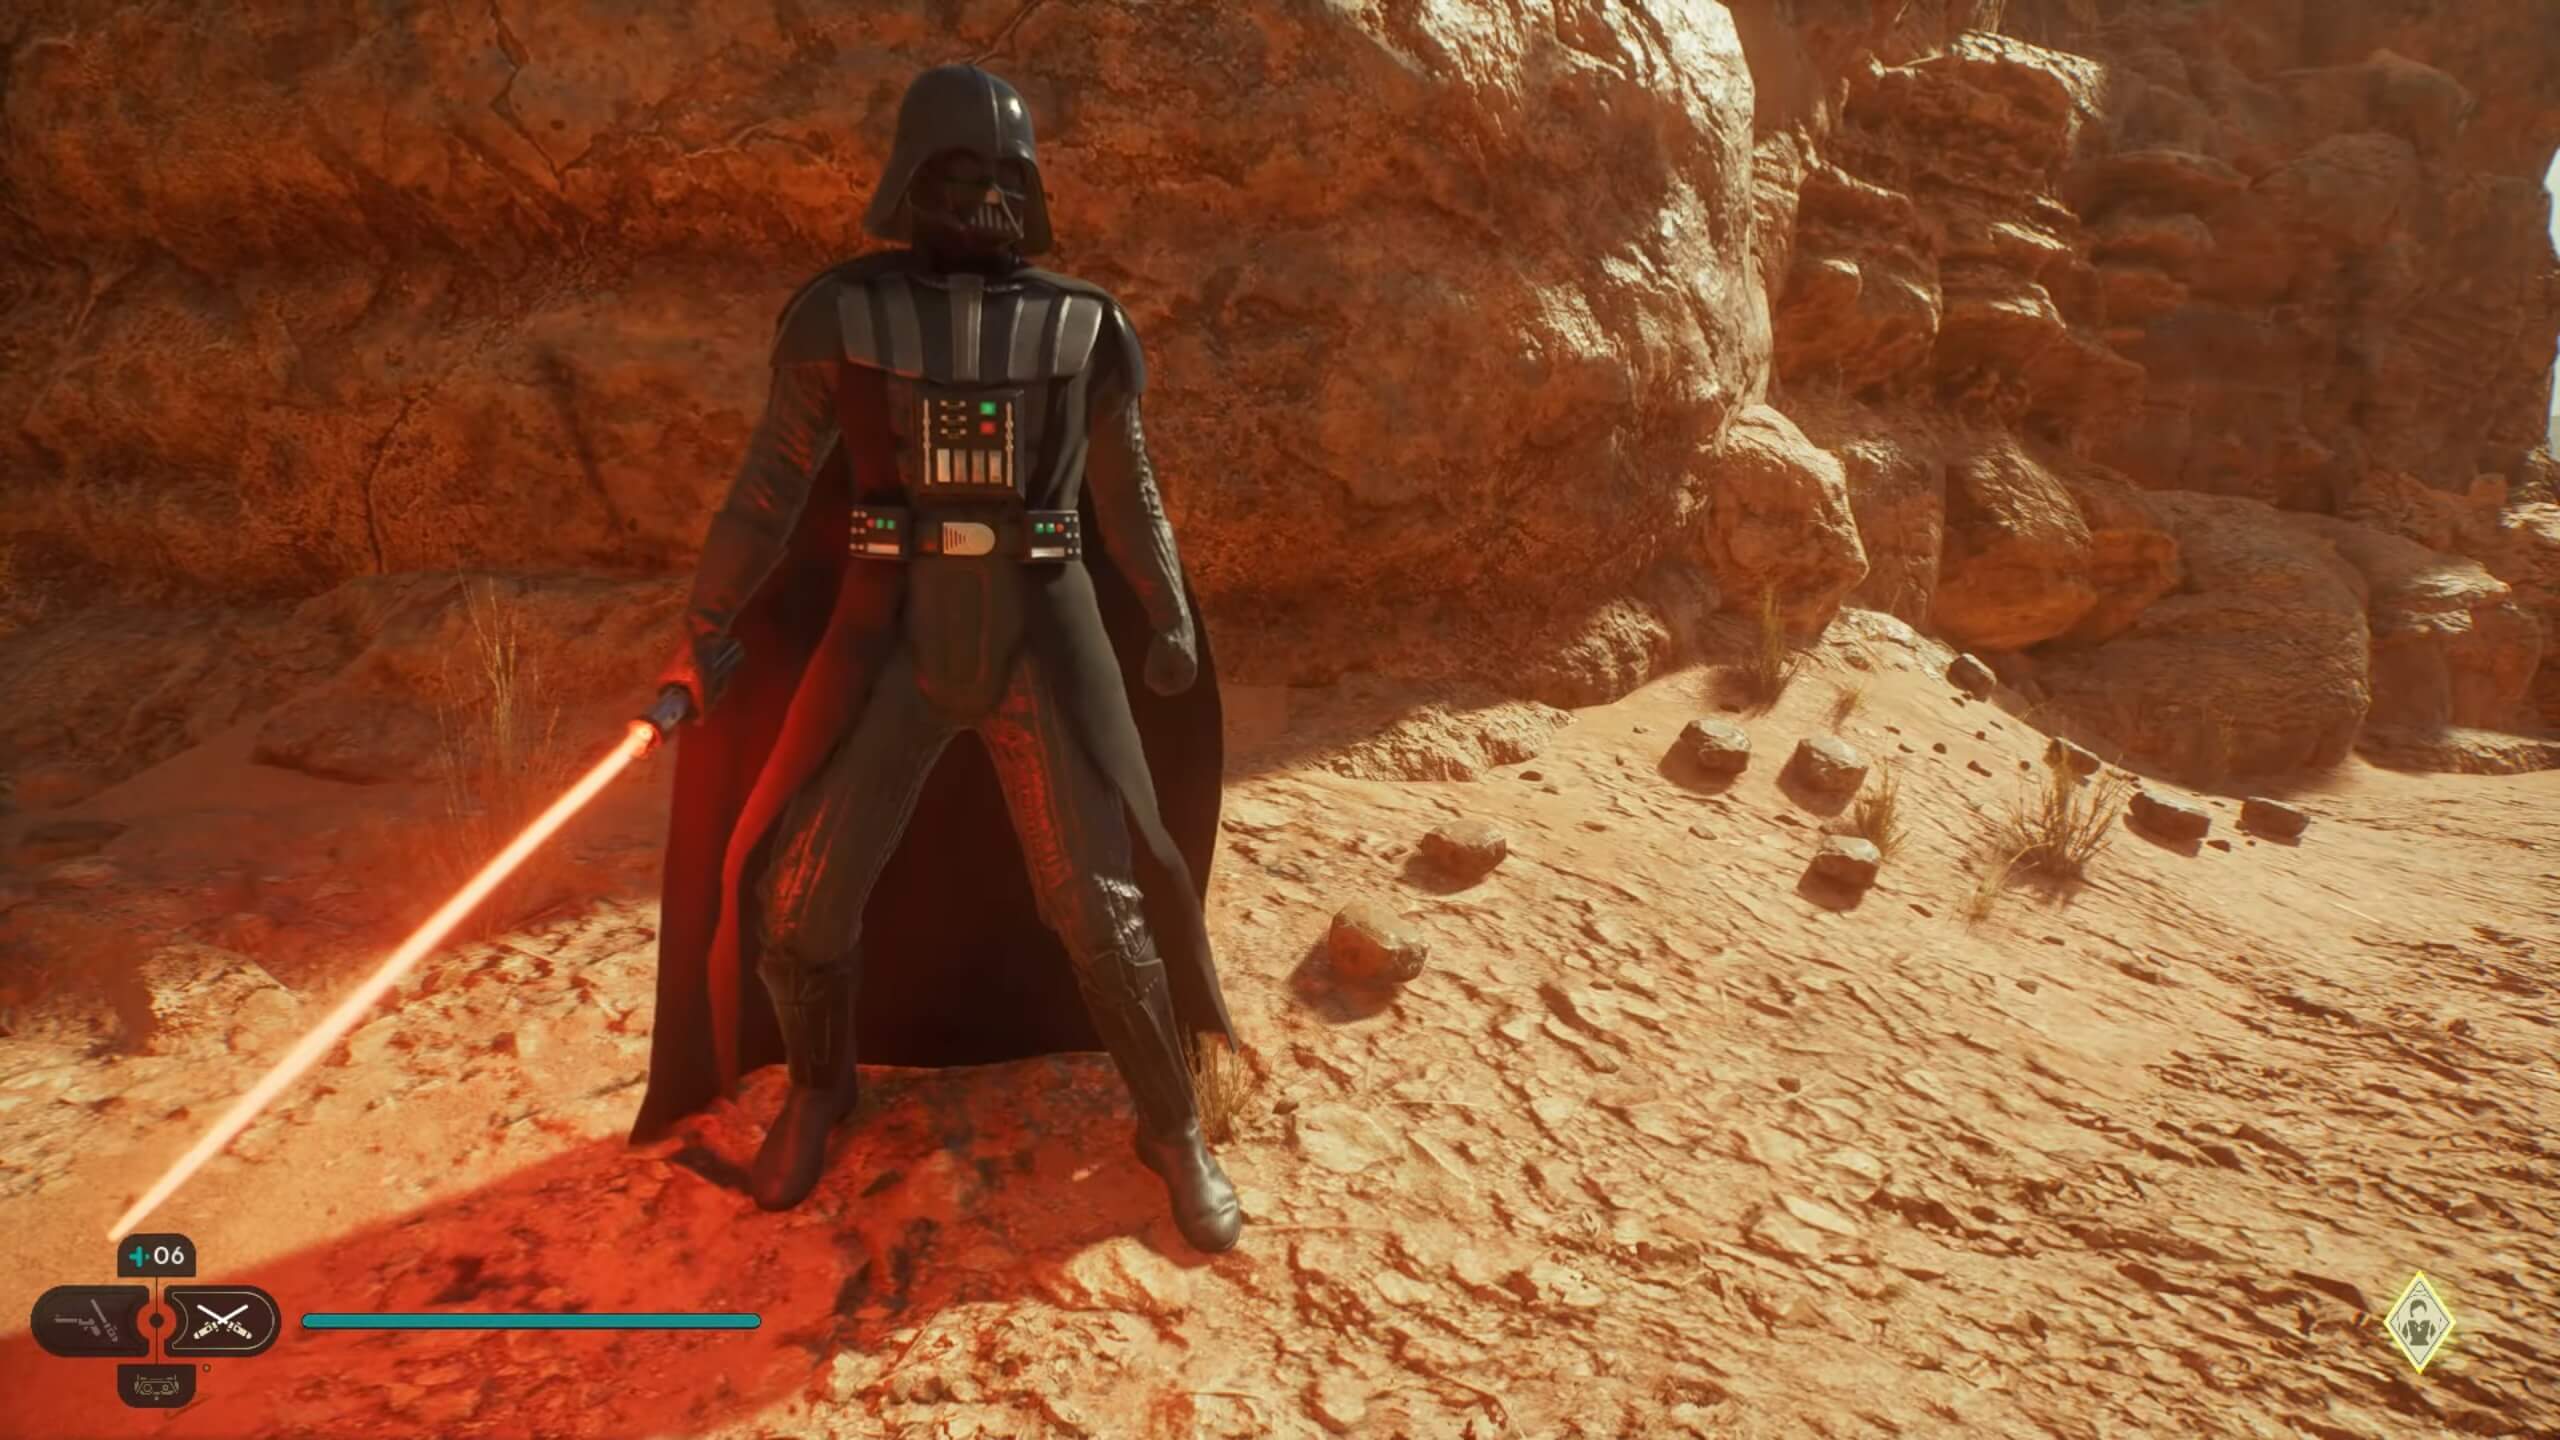 This Star Wars Jedi: Survivor Mod lets you play as Darth Vader with unique force abilities attack moves